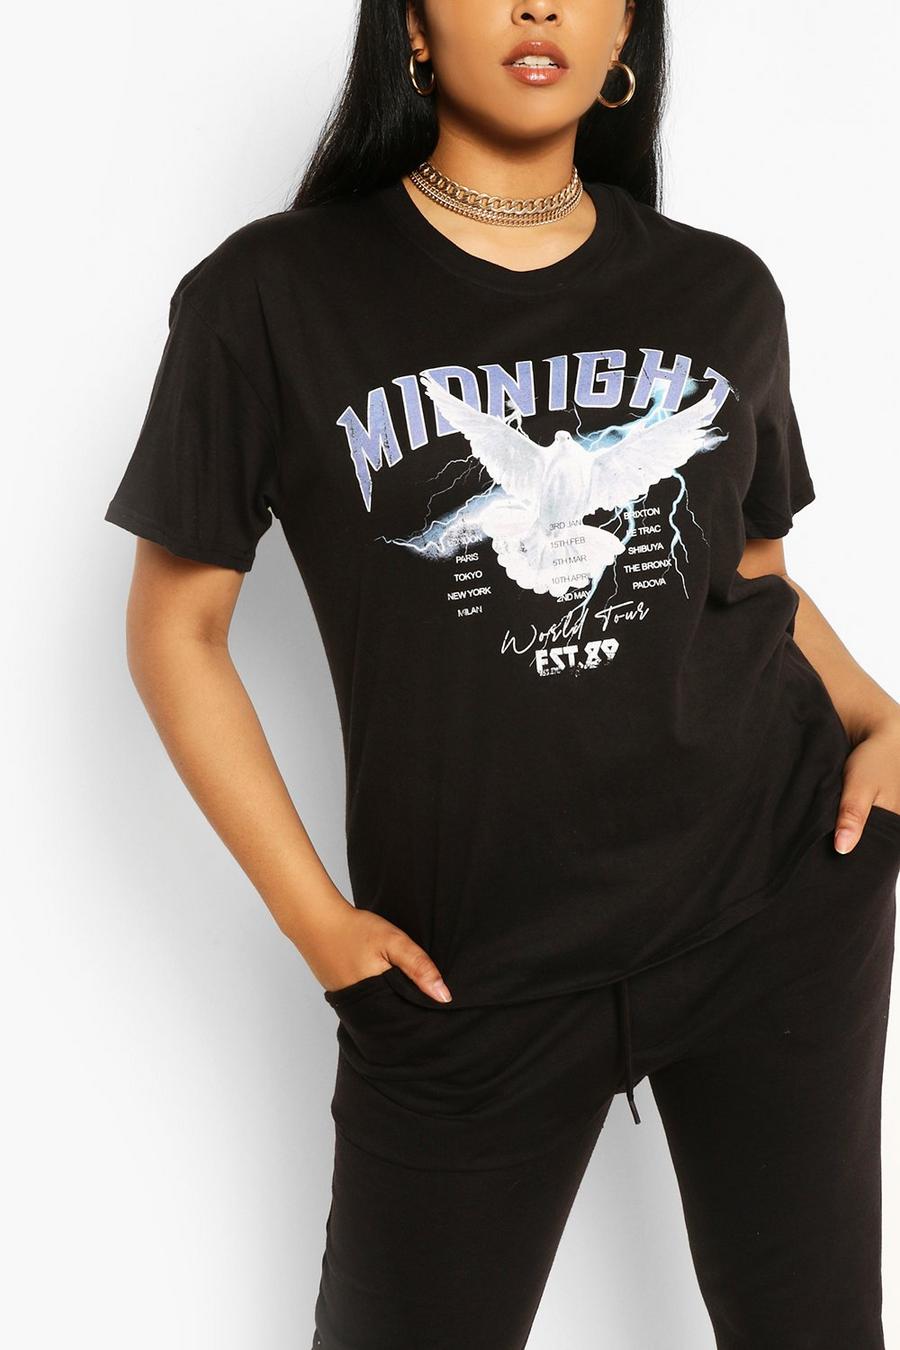 Plus - "Midnight Band" T-shirt image number 1